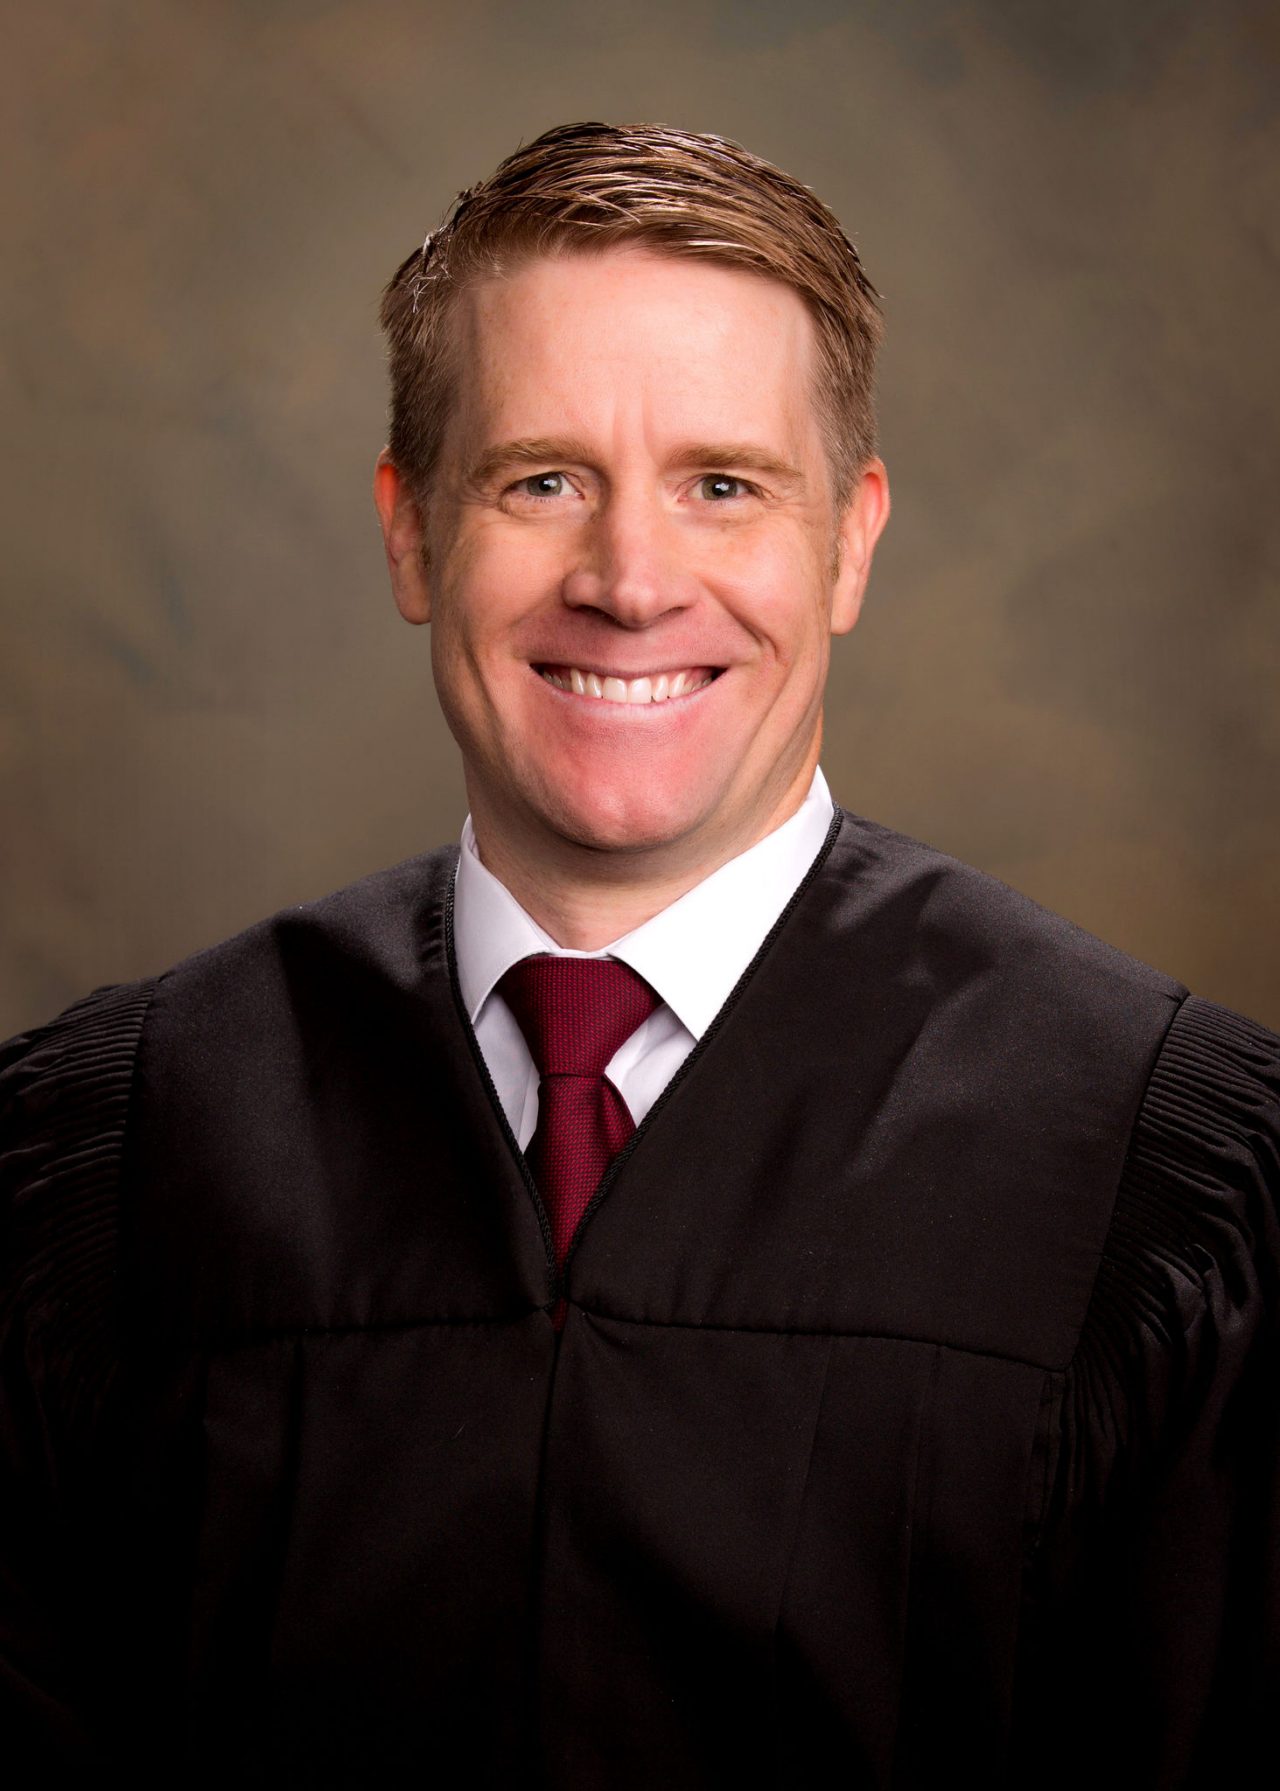 JUDGE ANTHONY L. HOWELL